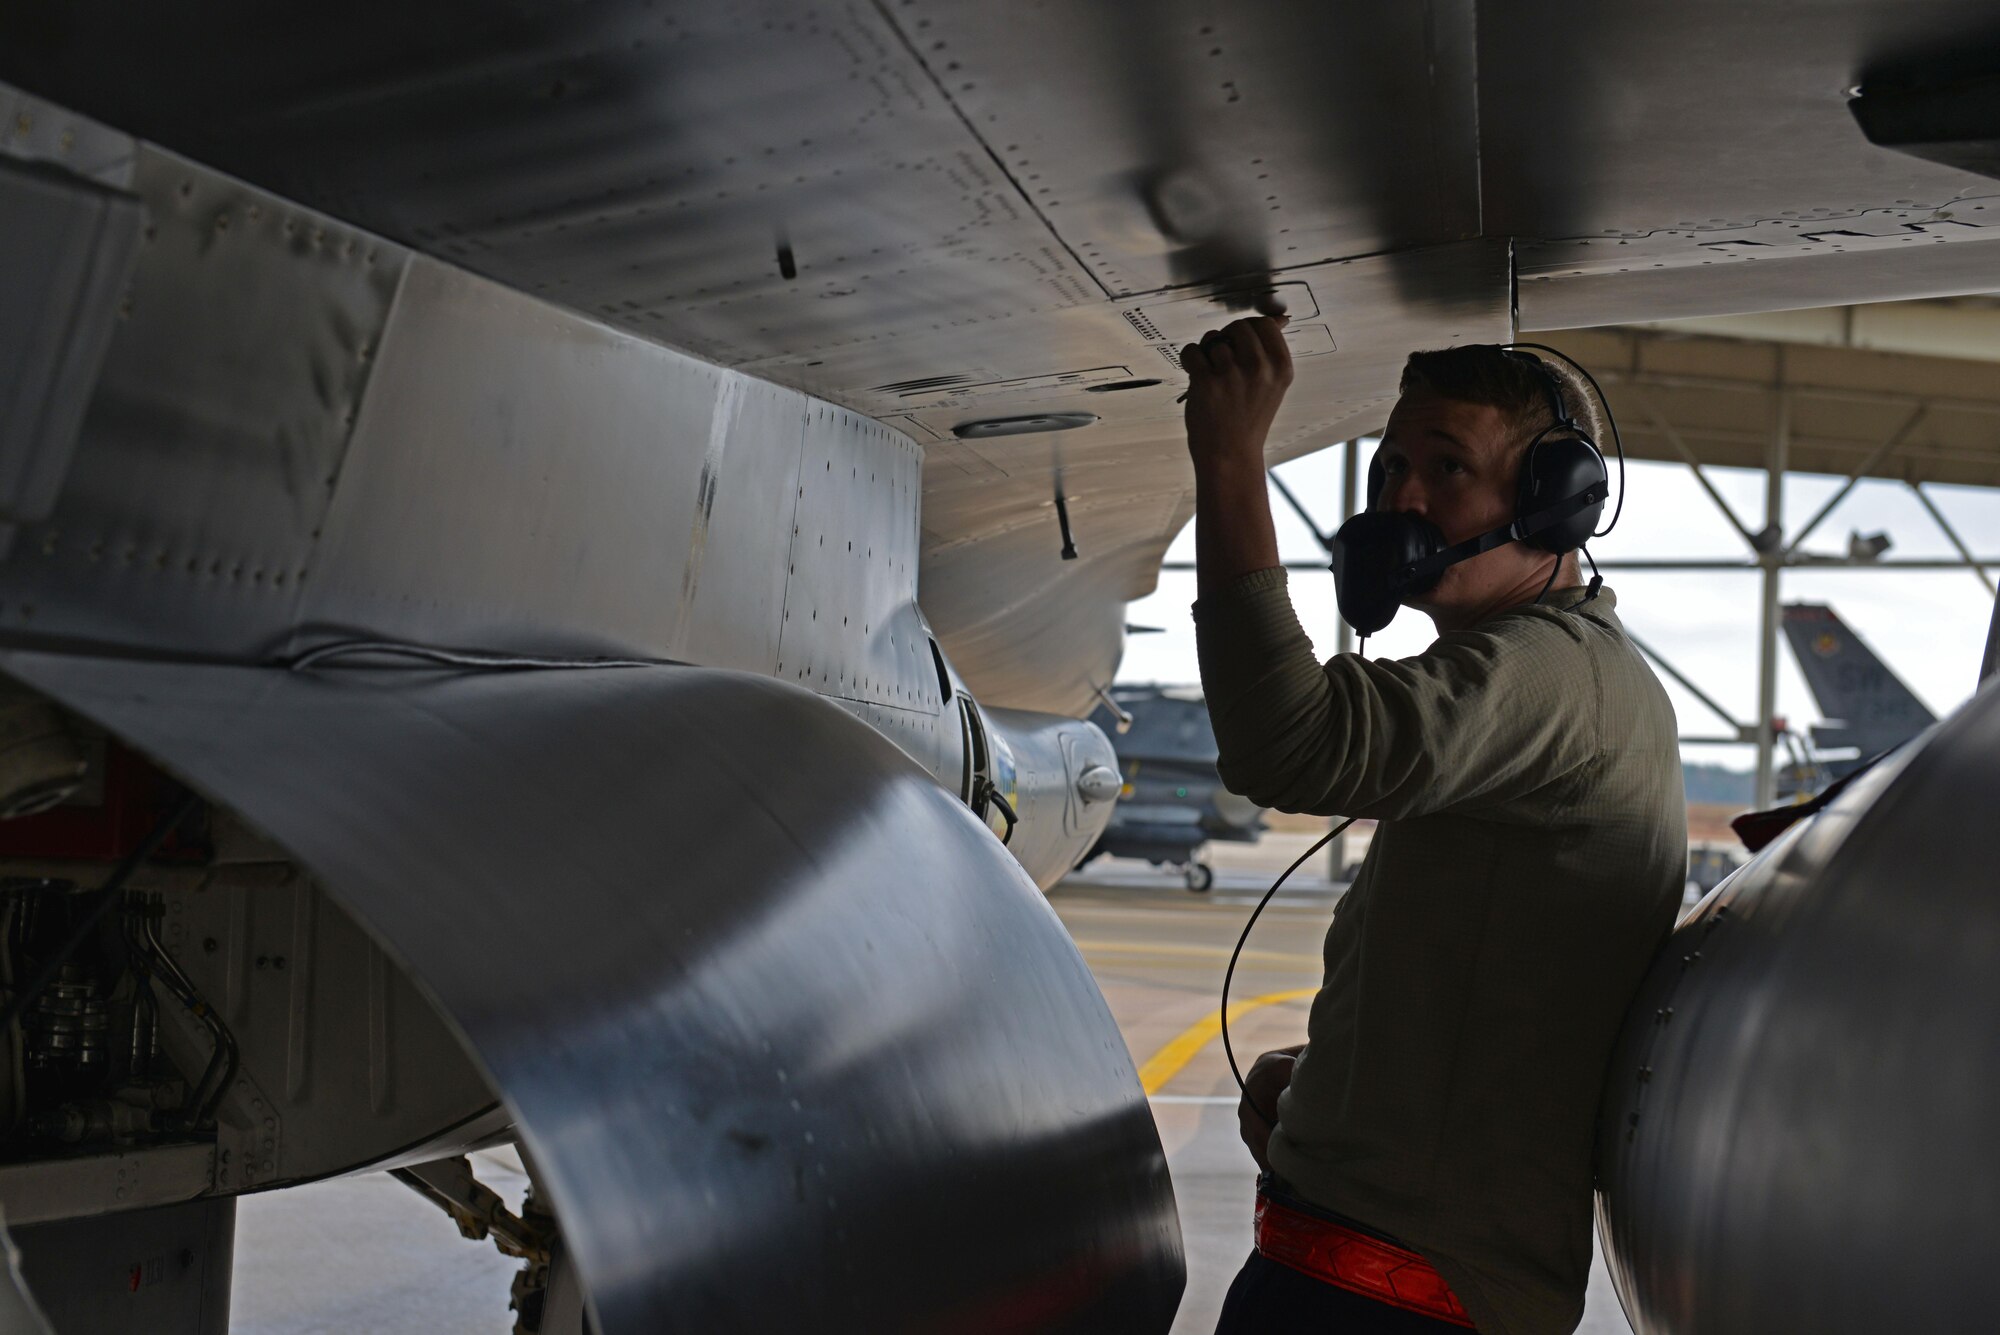 U.S. Air Force Senior Airman Zachary Jinkins, 20th Aircraft Maintenance Squadron tactical aircraft maintainer, performs a final inspection on an F-16CM Fighting Falcon at Shaw Air Force Base, S.C., Dec. 14, 2016. To ensure the safety of pilots, F-16s are inspected for mechanical failures, leaks and loose panels by tactical aircraft maintainers prior to flight. (U.S. Air Force photo by Airman 1st Class Destinee Sweeney)